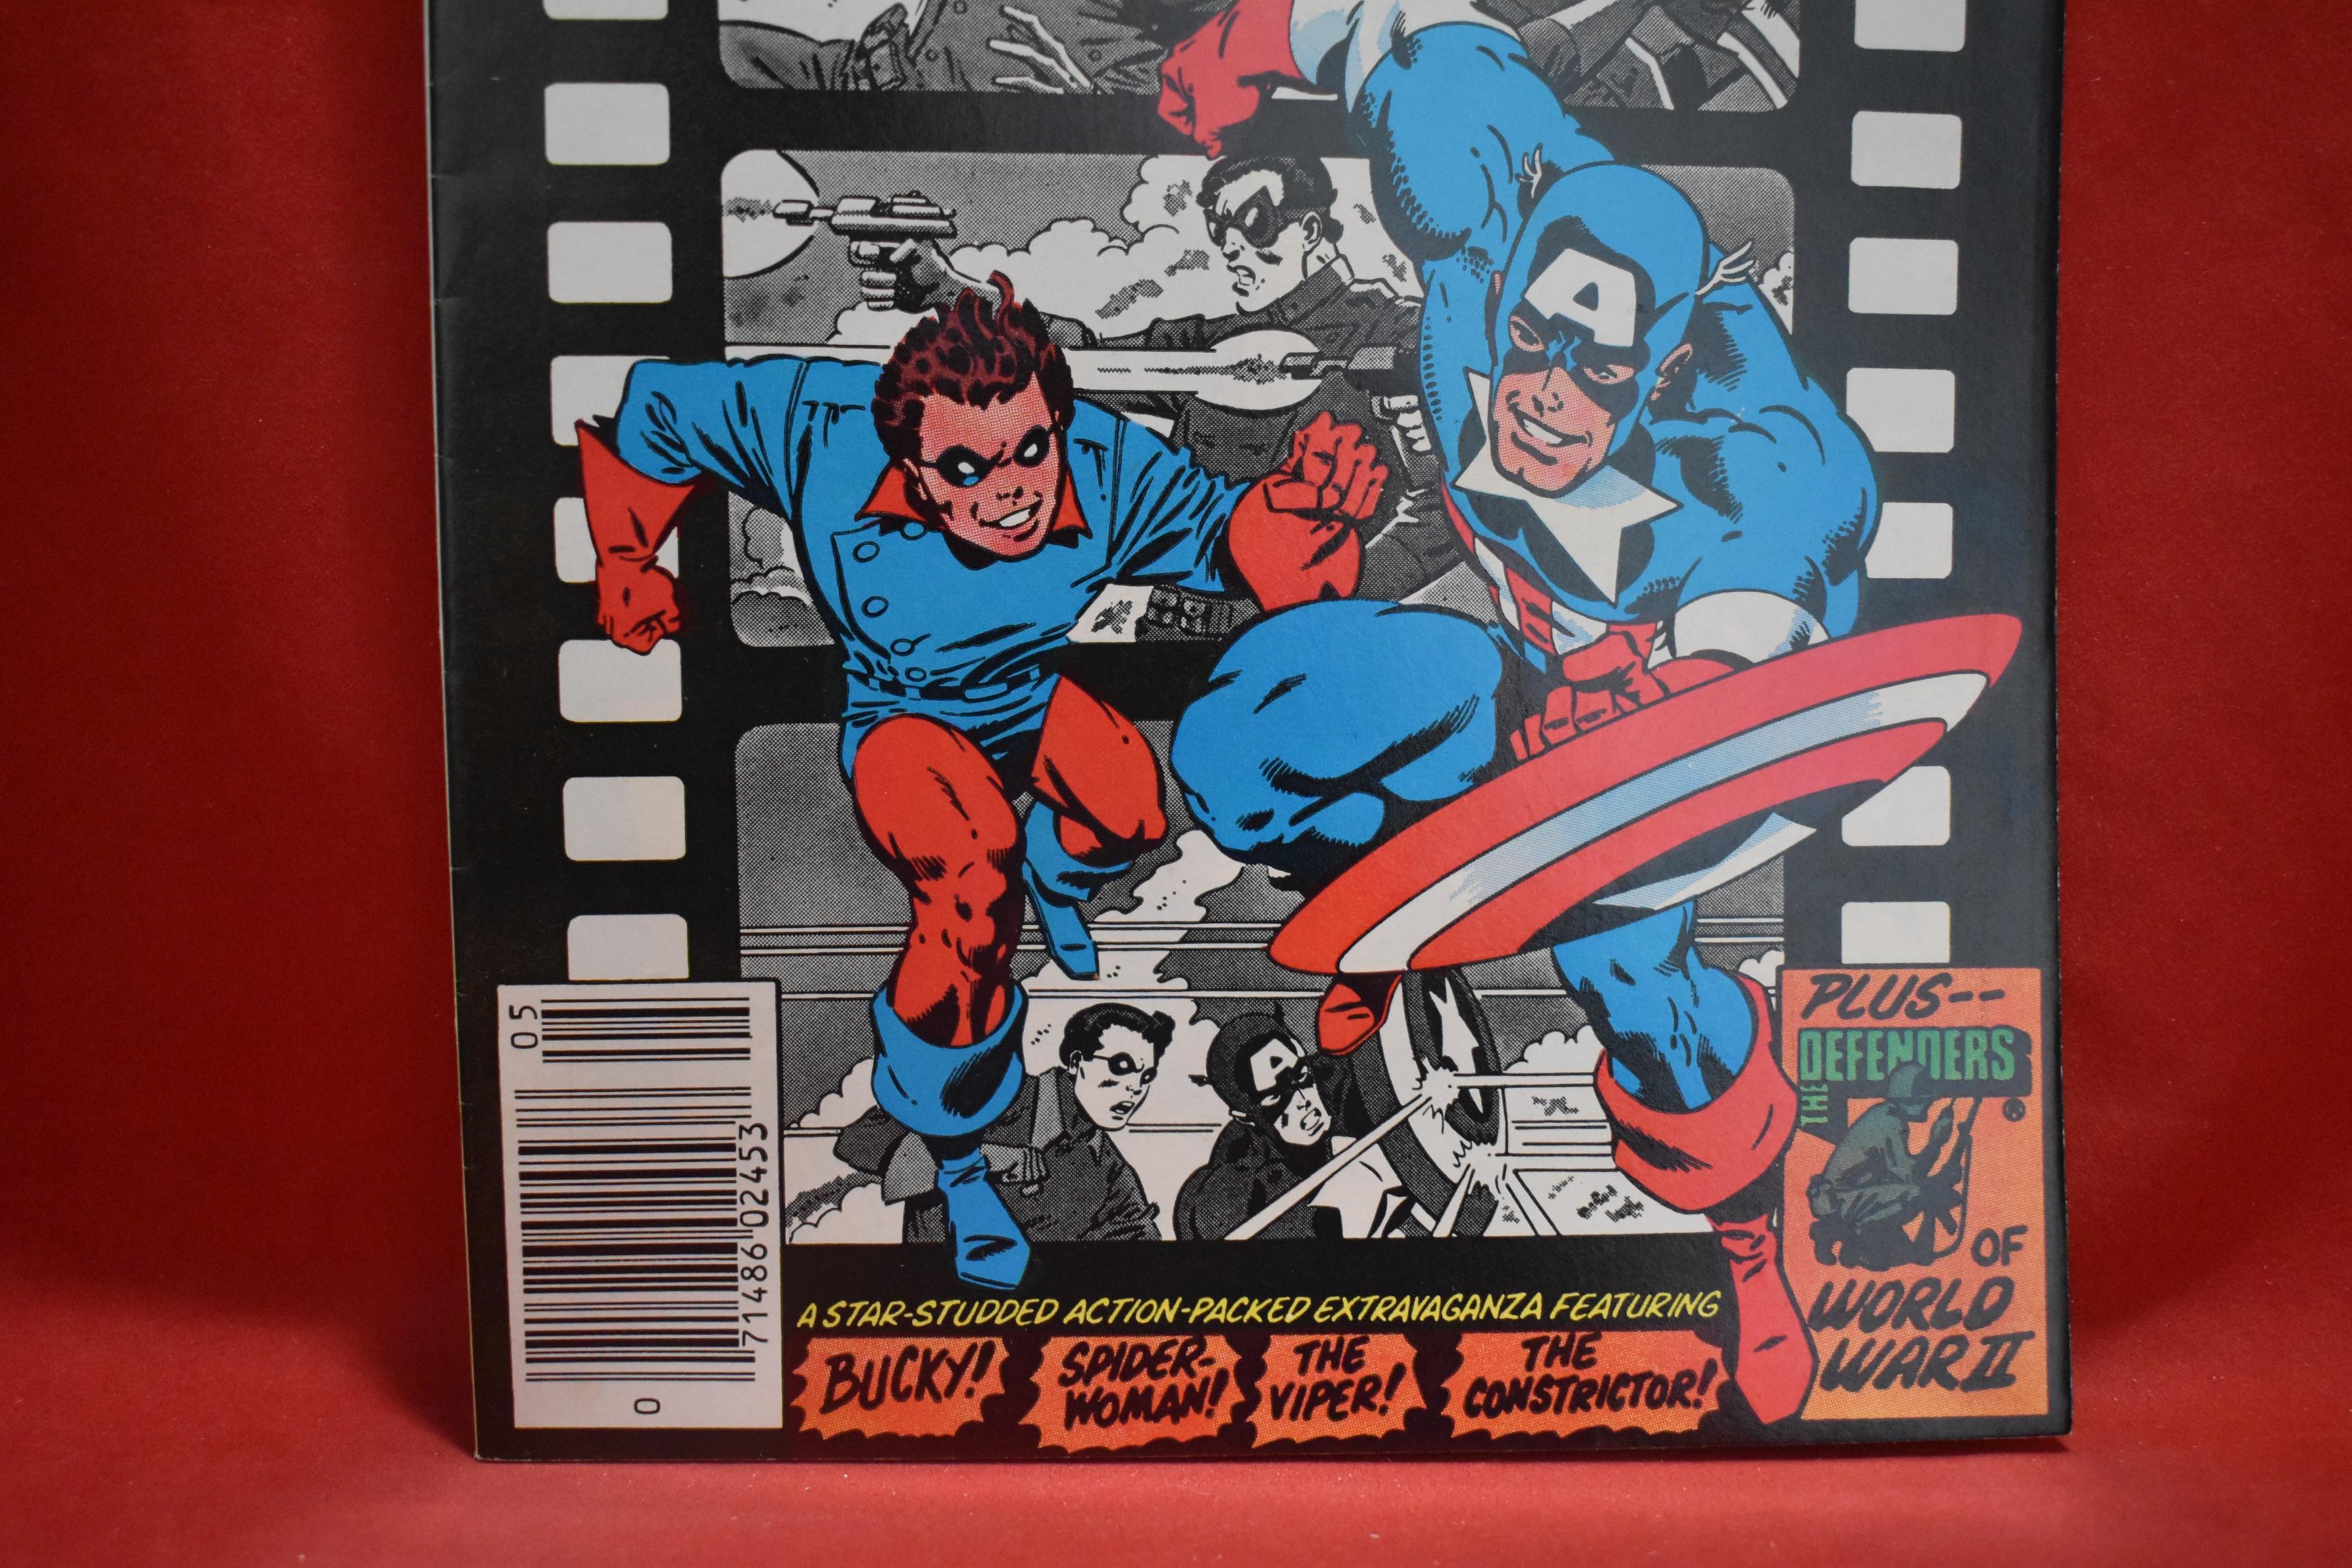 CAPTAIN AMERICA #281 | BEFORE THE FALL! | MIKE ZECK - NEWSSTAND